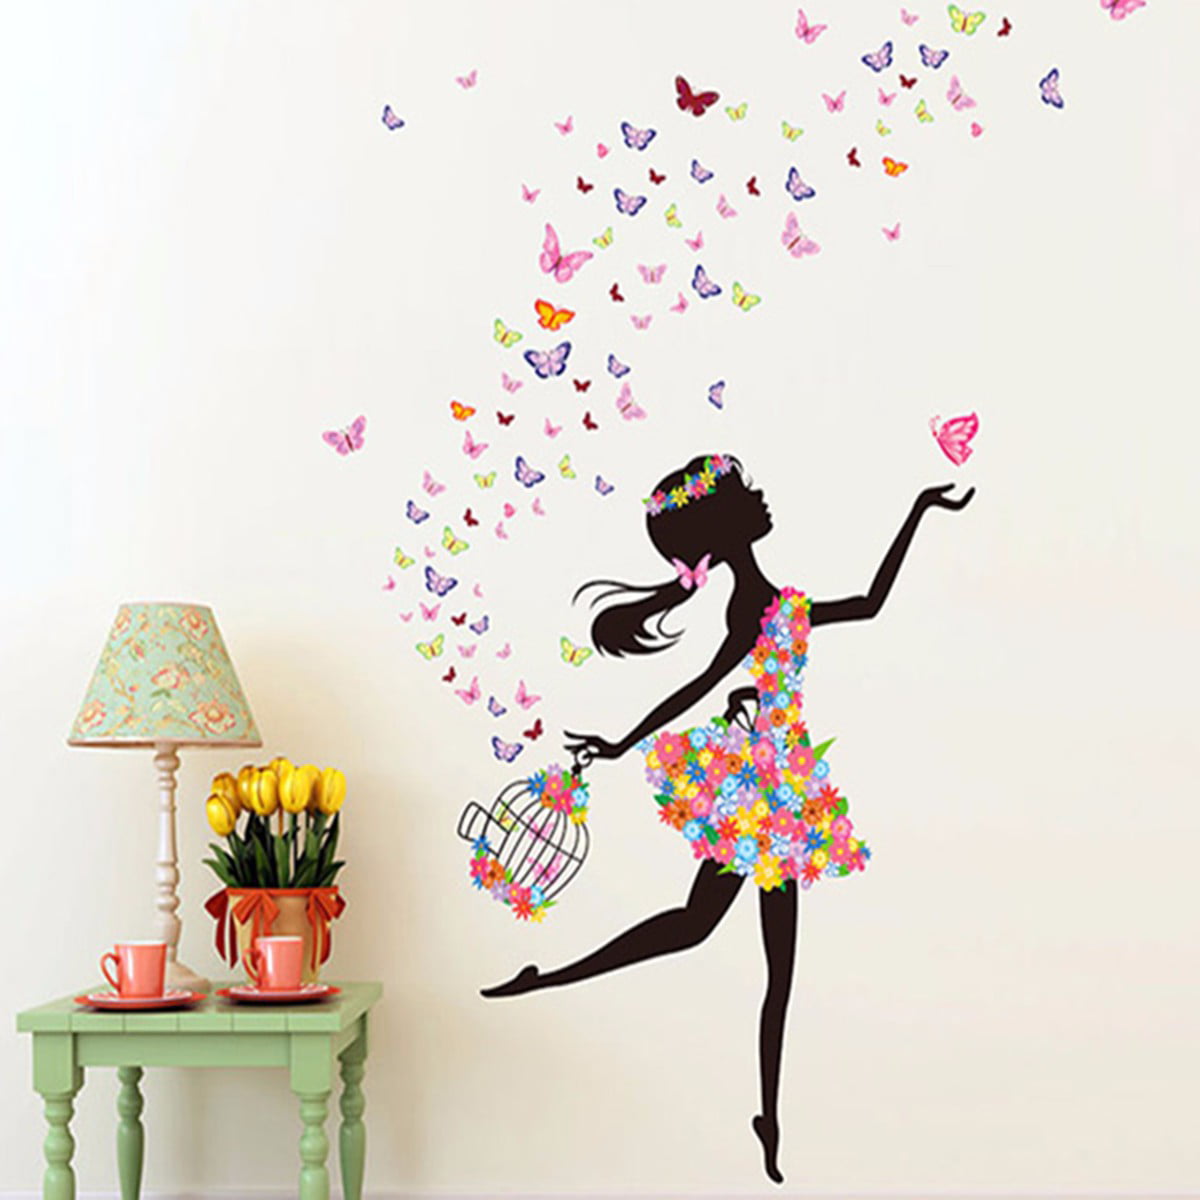 Girl Flower Removable Wall Stickers Vinyl Art Decal Mural Bedroom Home Decor H 